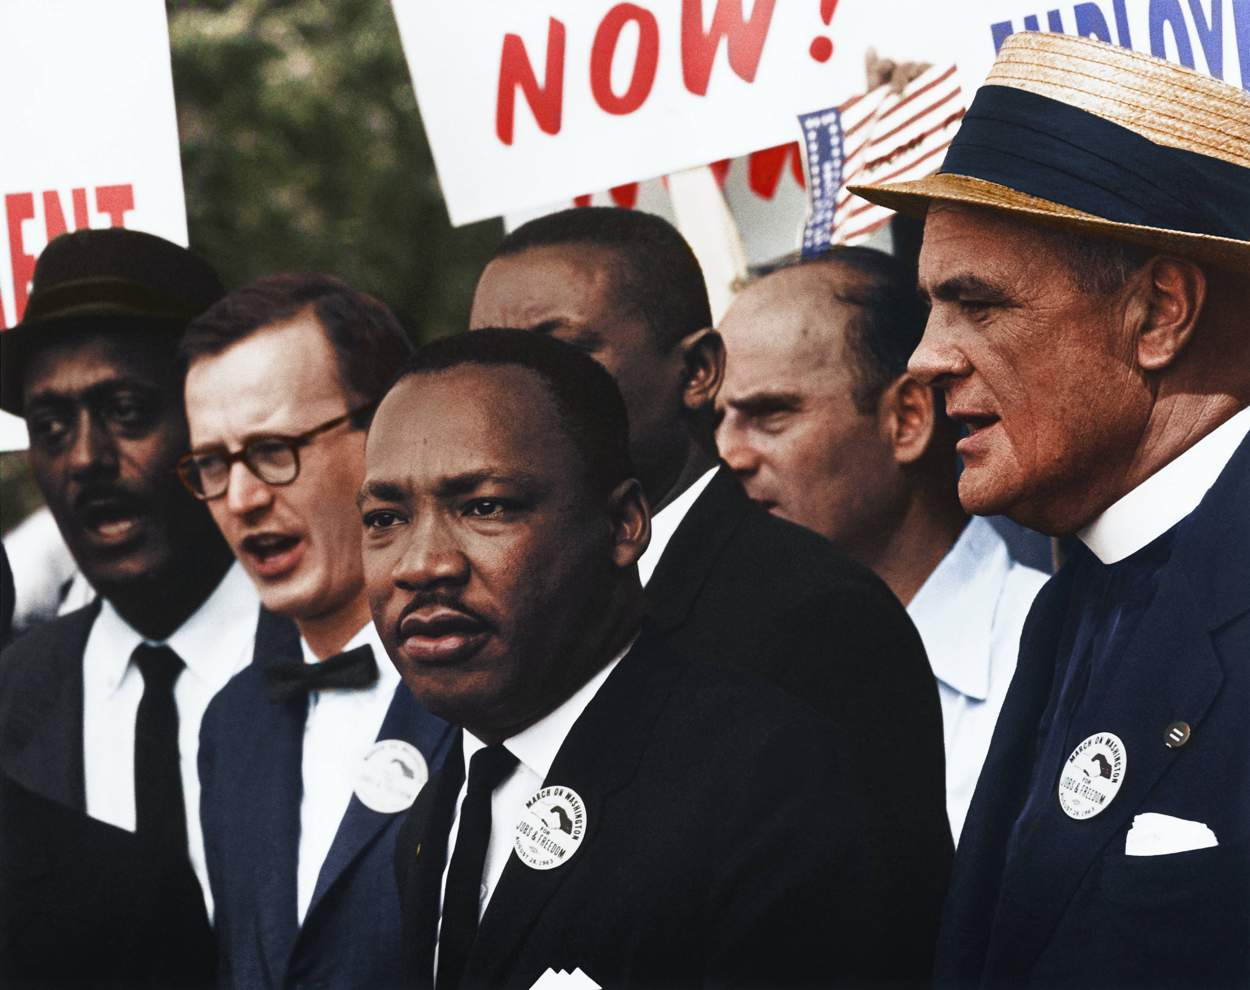  Martin Luther King, Jr. at civil rights march